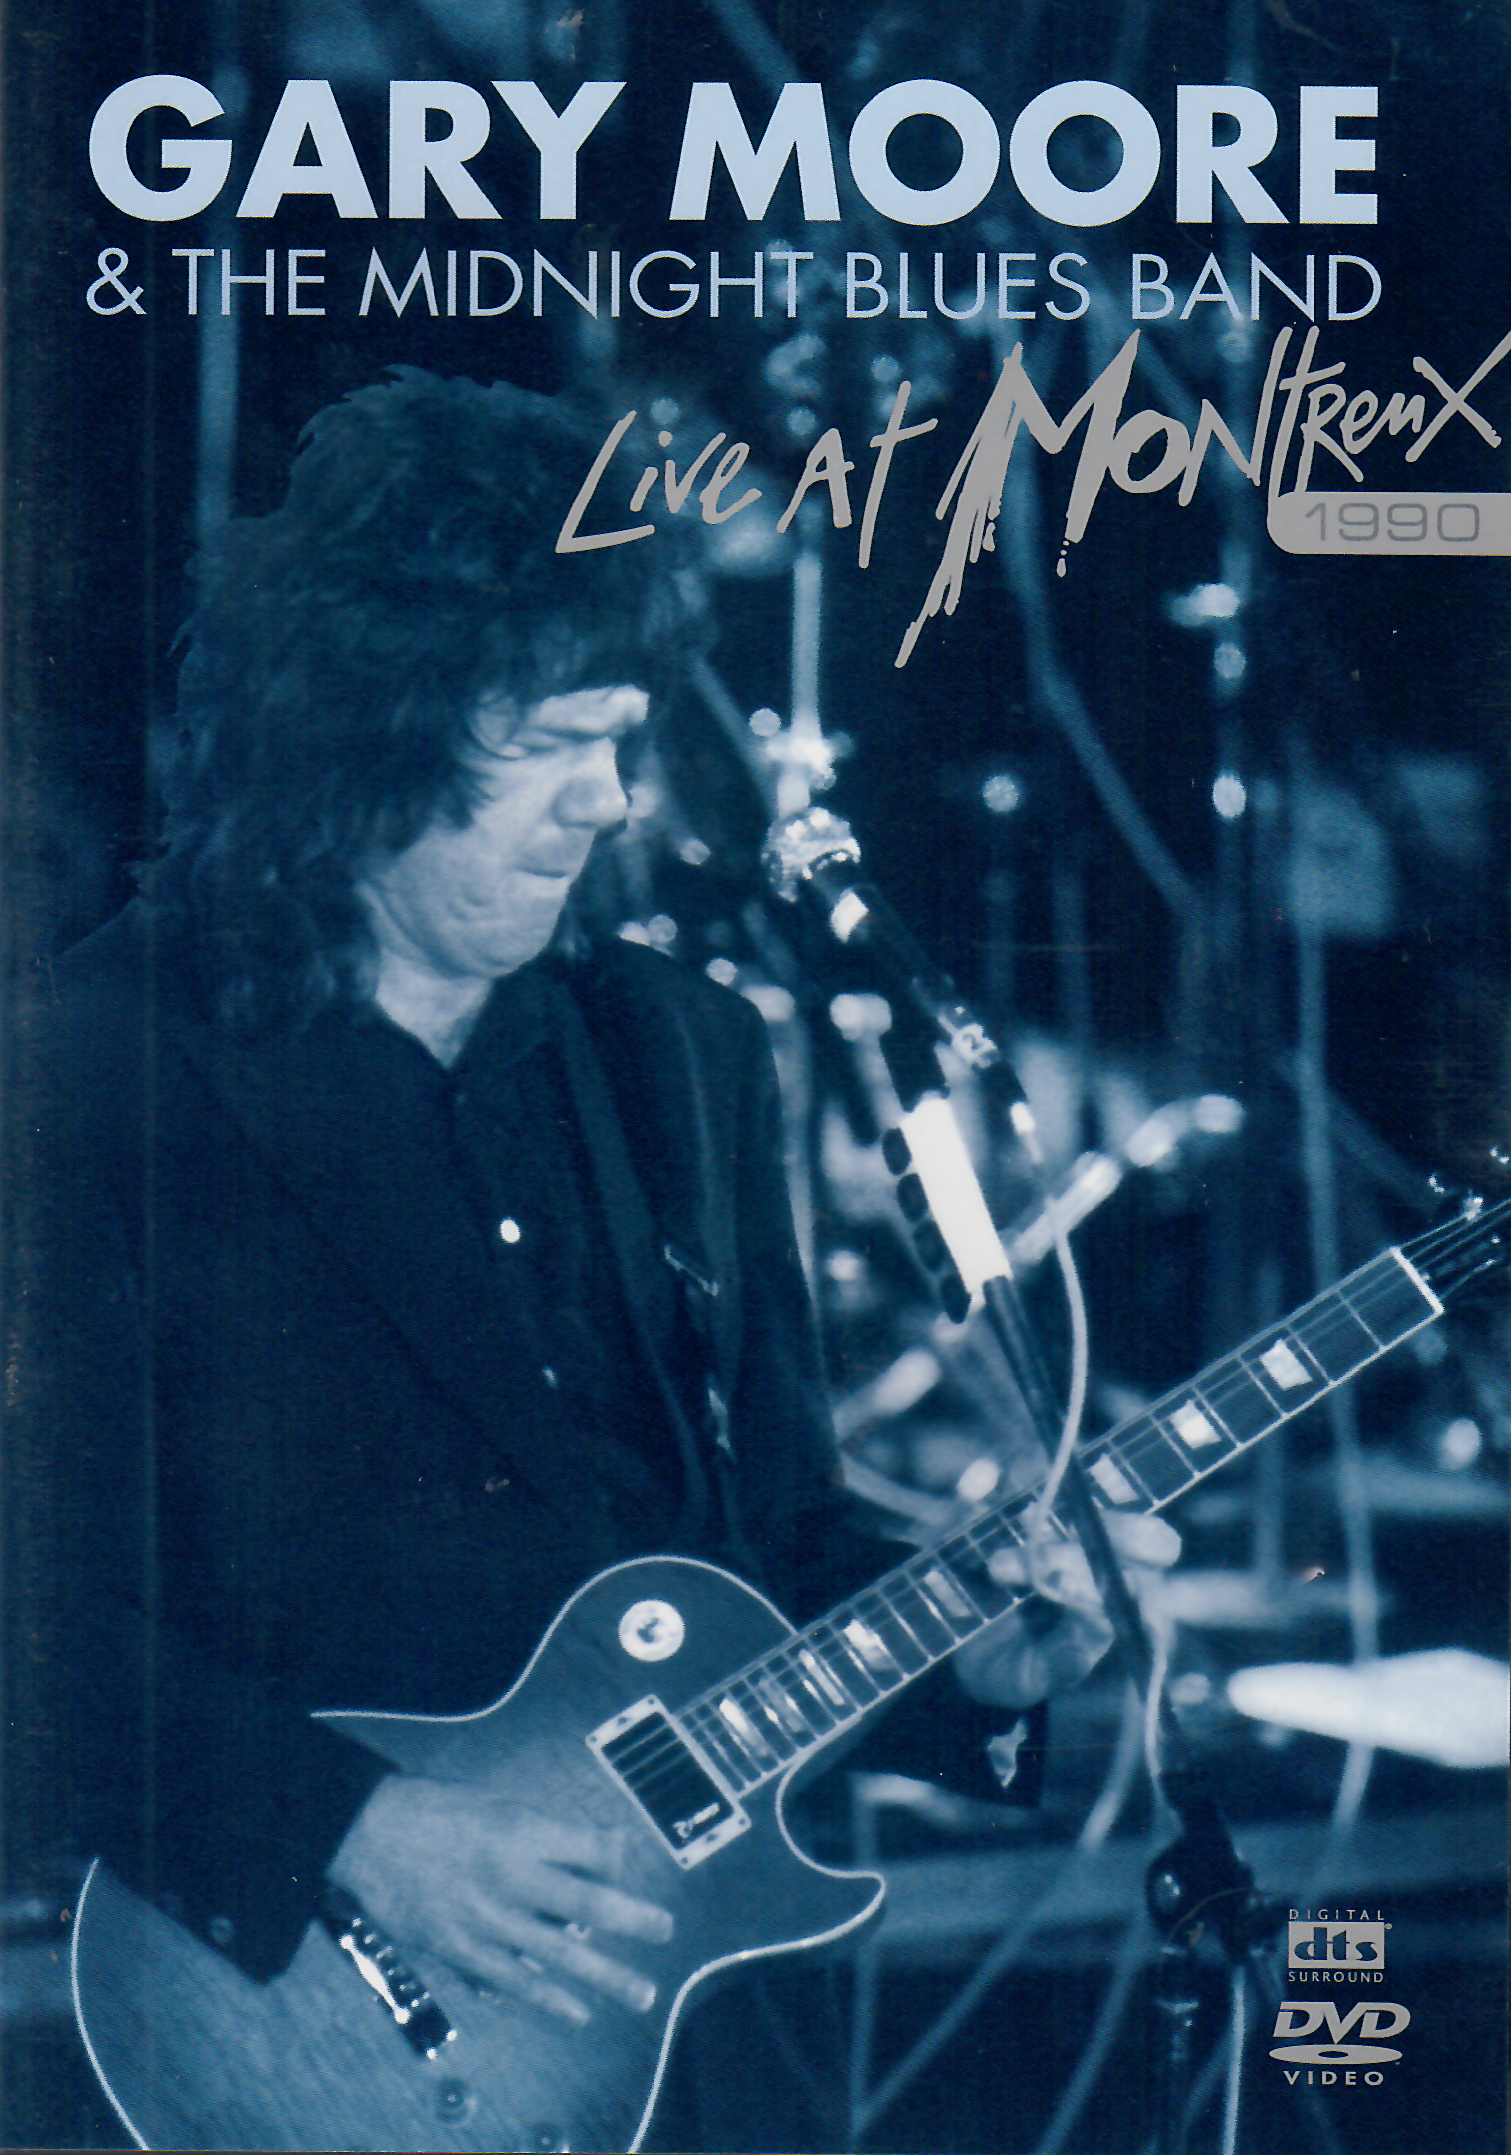 DVD Gary Moore & the midnight Blues Band Live at Montreux 1990